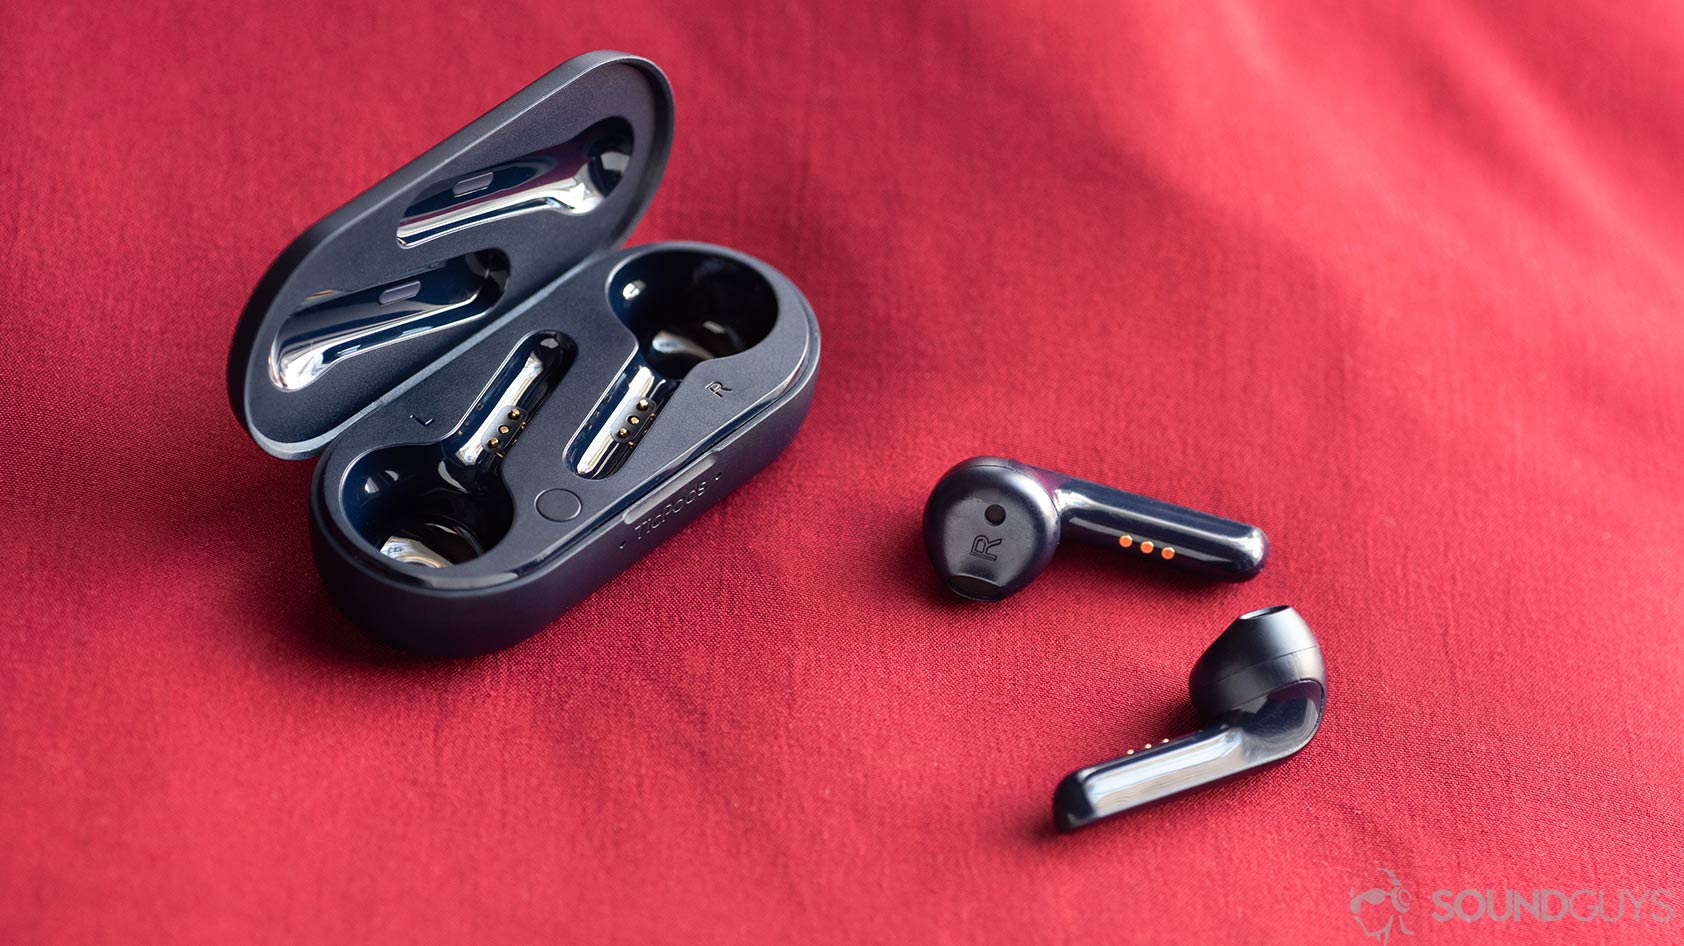 The Mobvoi TicPods 2 Pro true wireless earbuds outside of the charging case.